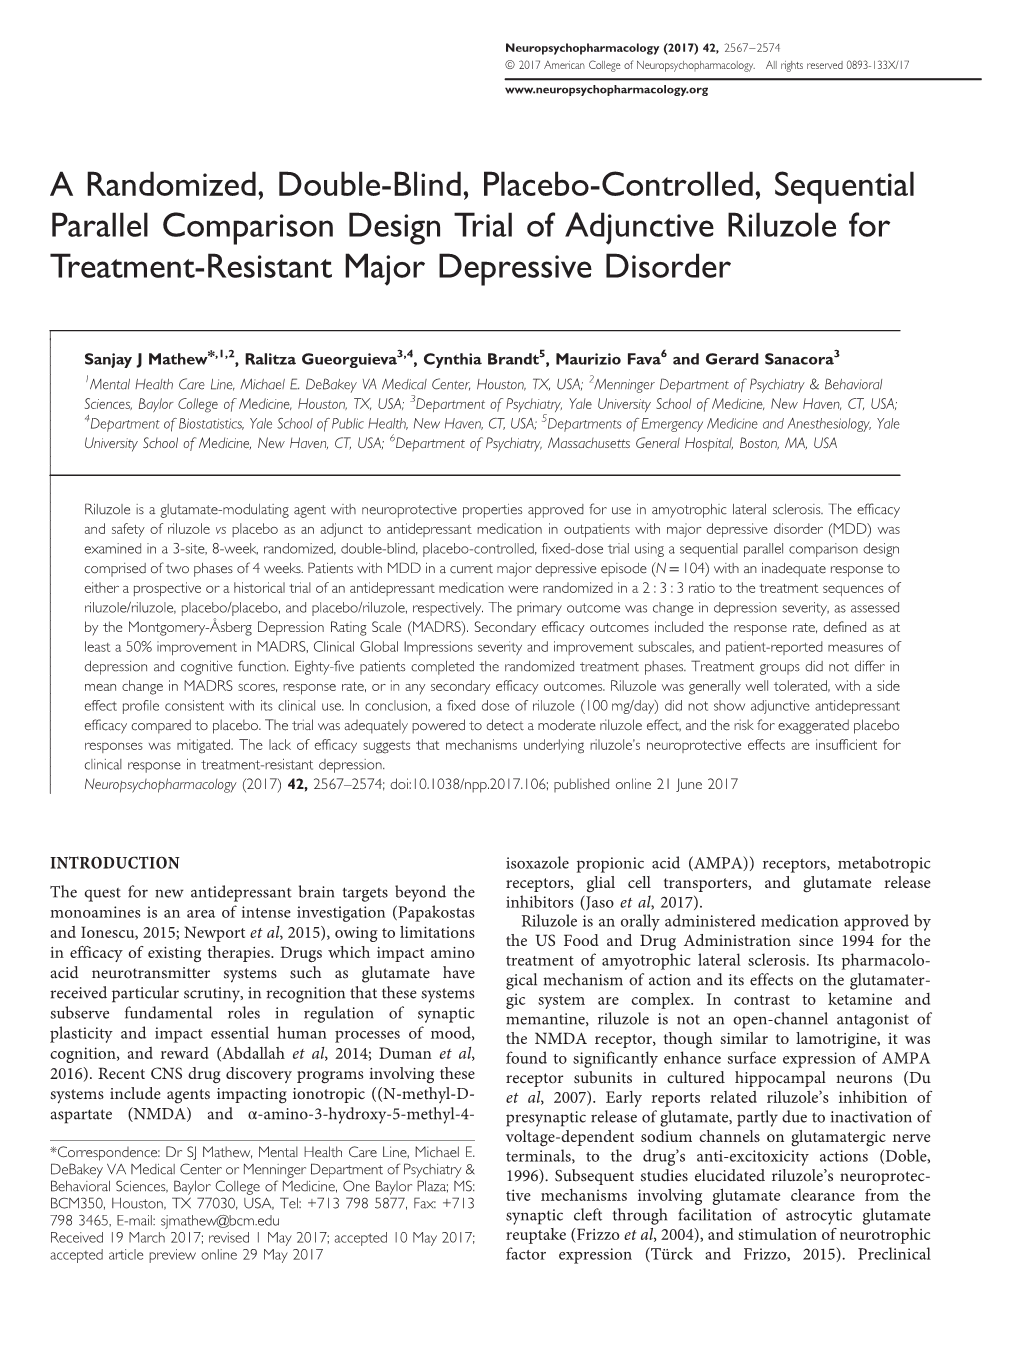 A Randomized, Double-Blind, Placebo-Controlled, Sequential Parallel Comparison Design Trial of Adjunctive Riluzole for Treatment-Resistant Major Depressive Disorder